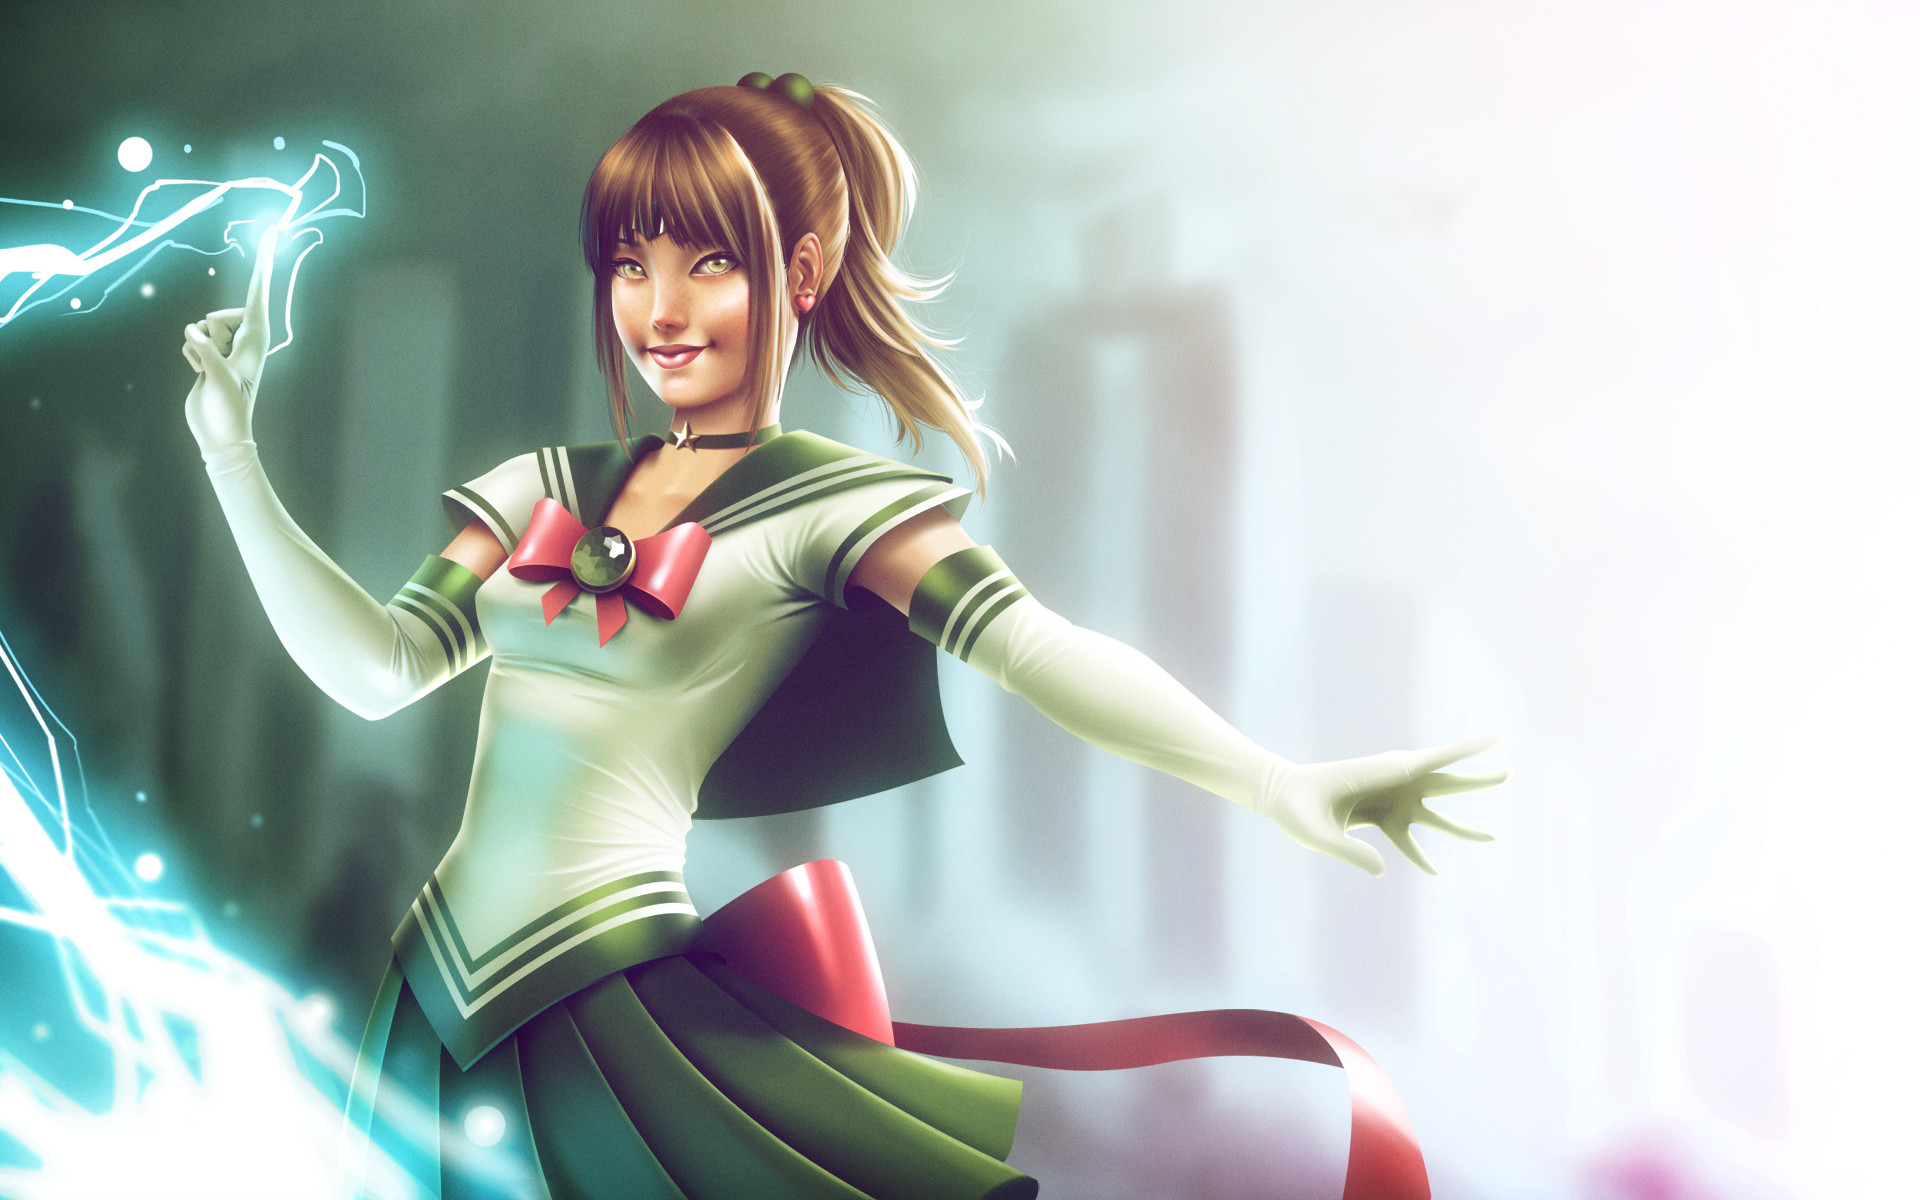 1920x1200 PGSM images sailor Jupiter HD wallpaper and background photos